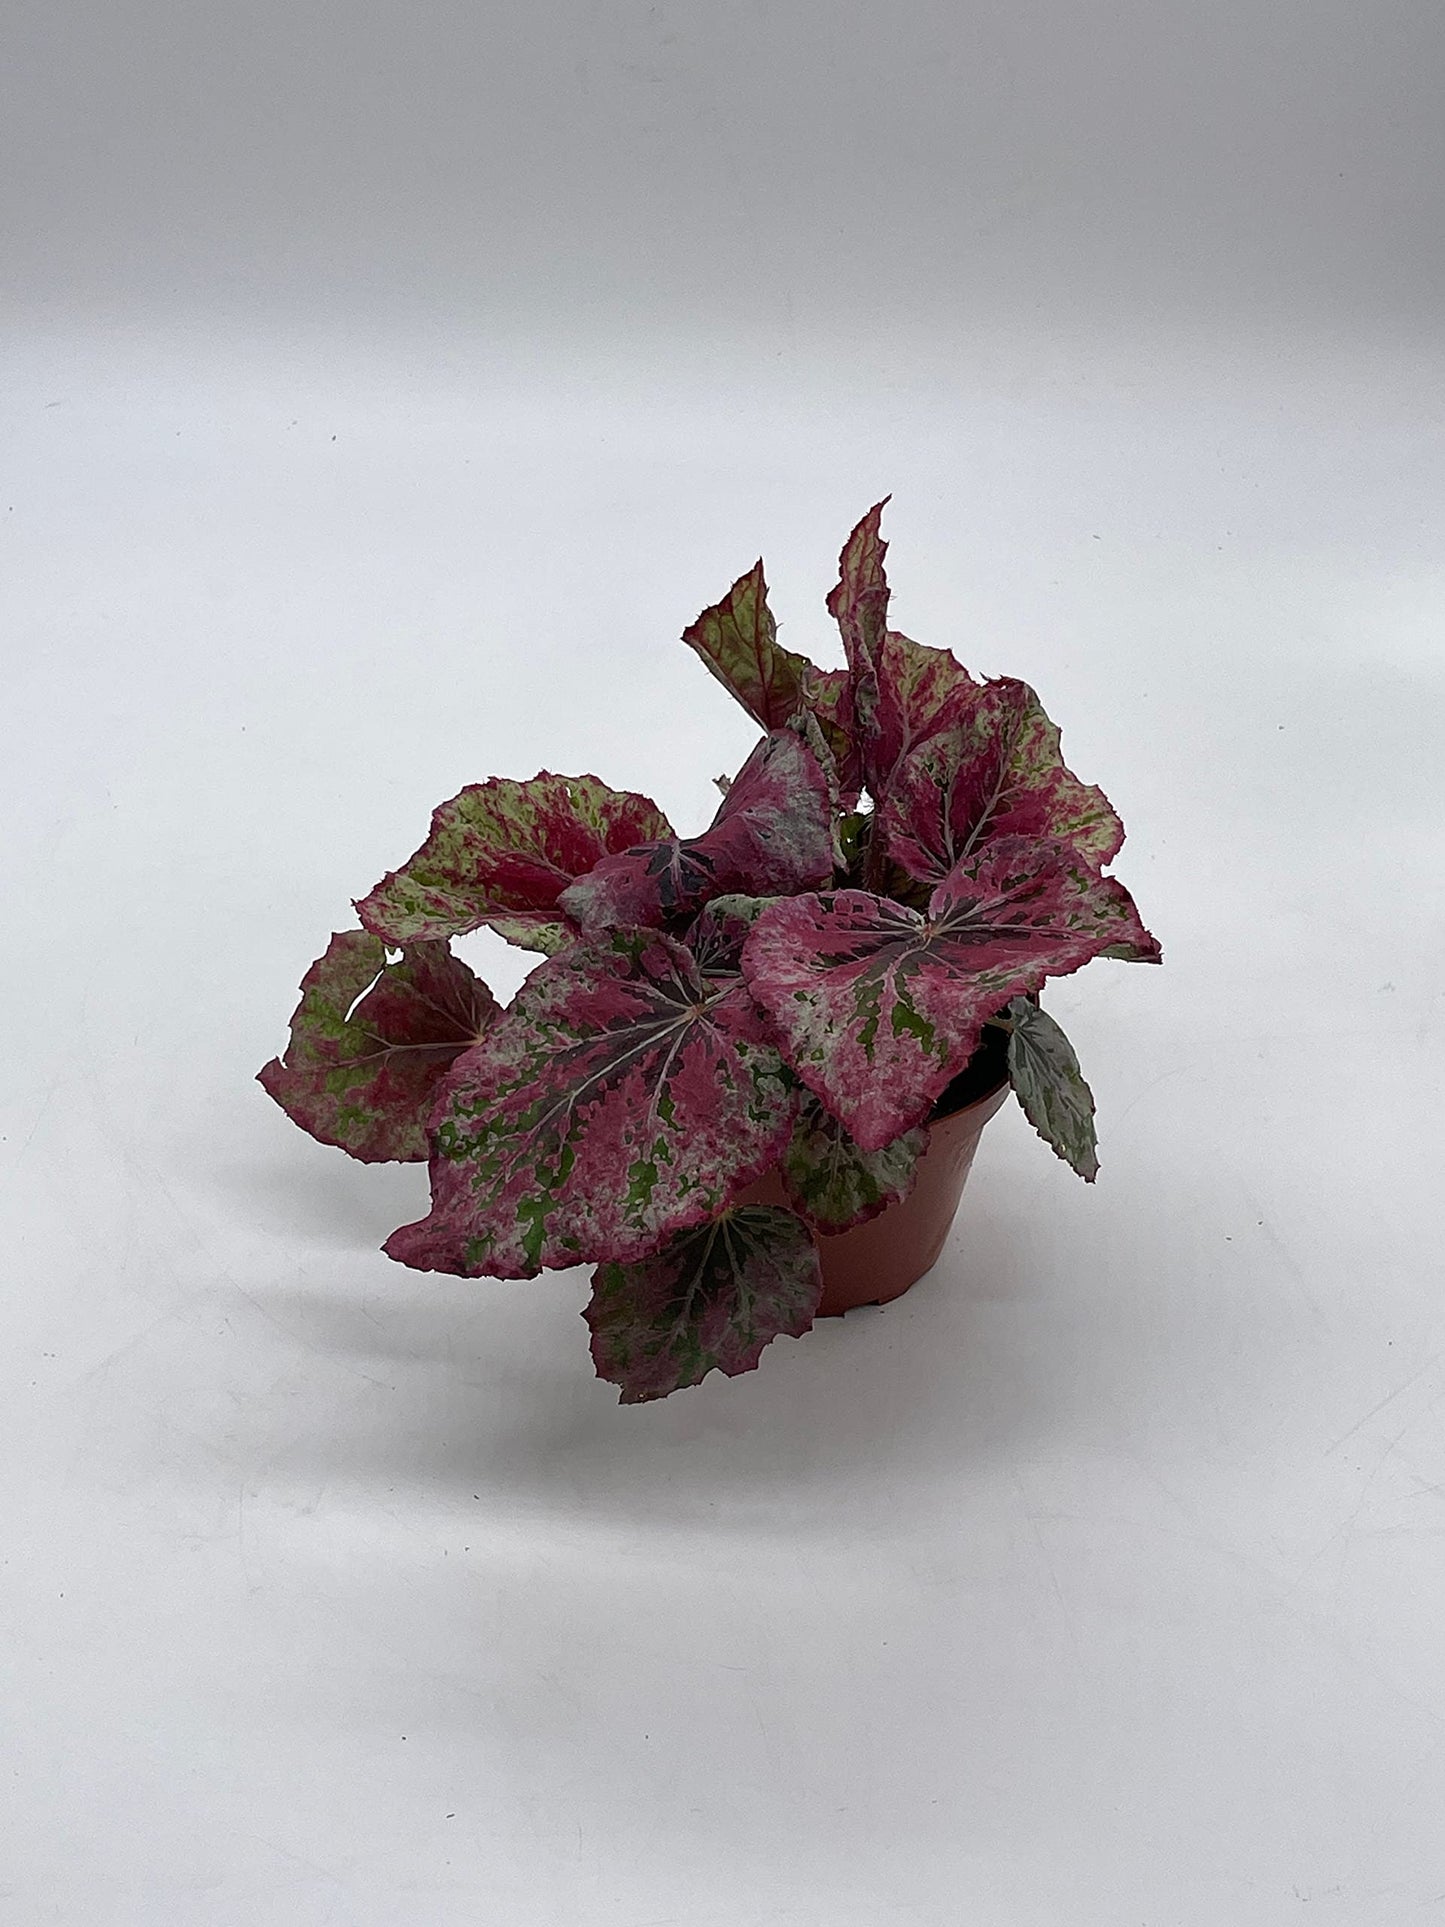 BubbleBlooms 'Harmony's Venetian Red', Begonia Rex, 4 inch, Painted-Leaf Begonia, Unique Homegrown Exclusive